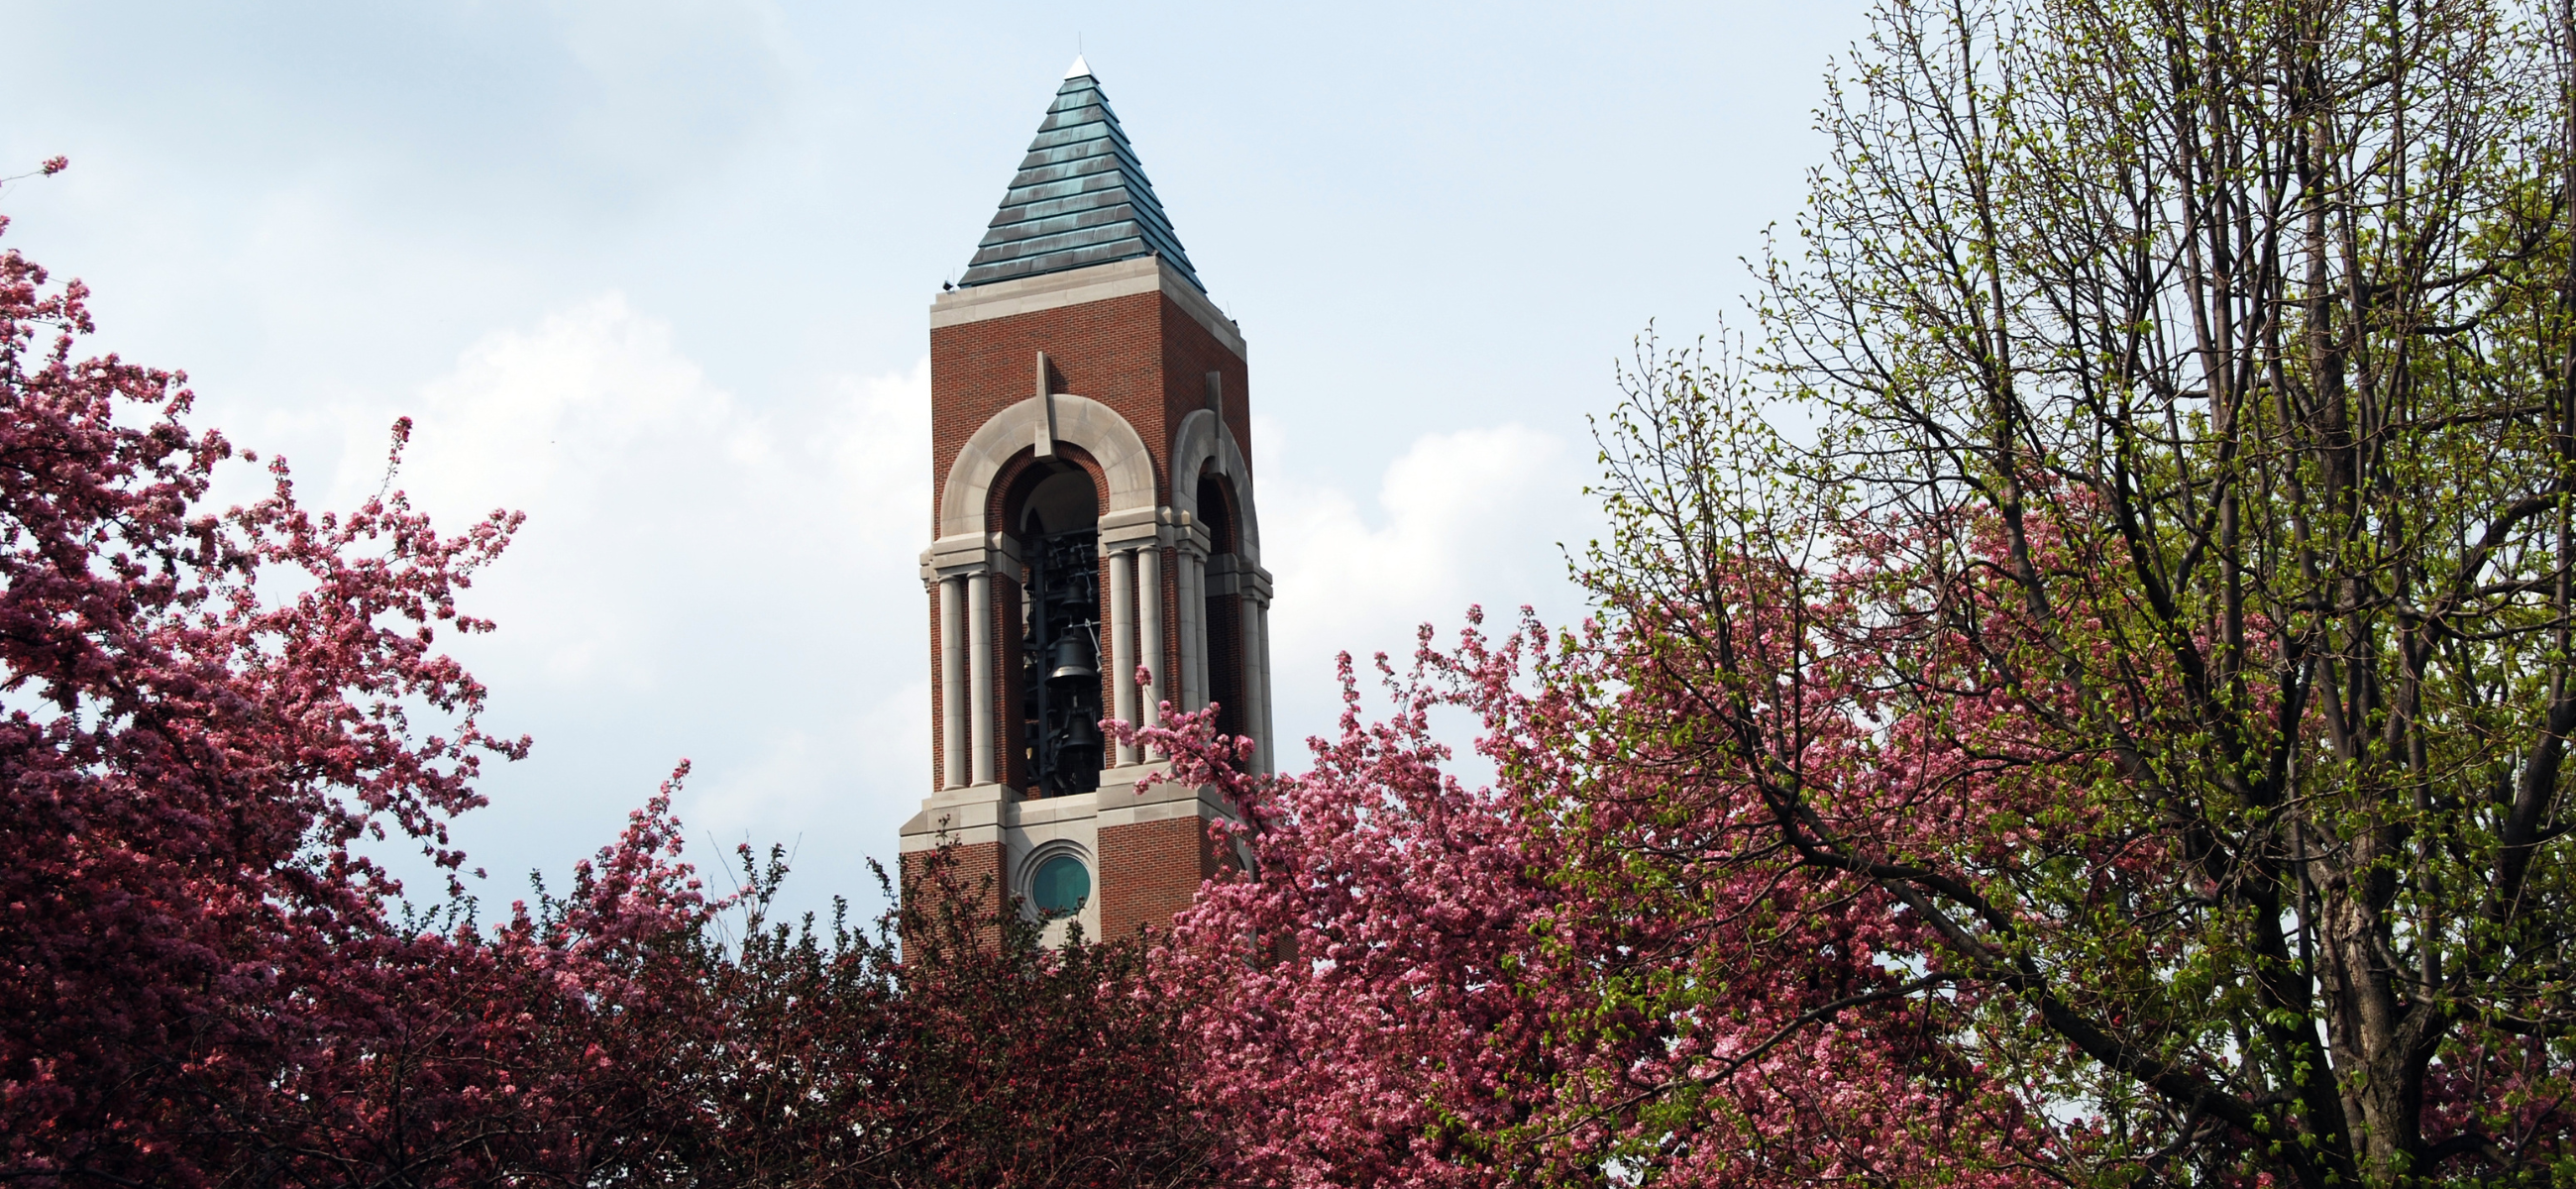 Shafer Bell Tower at Ball State University.